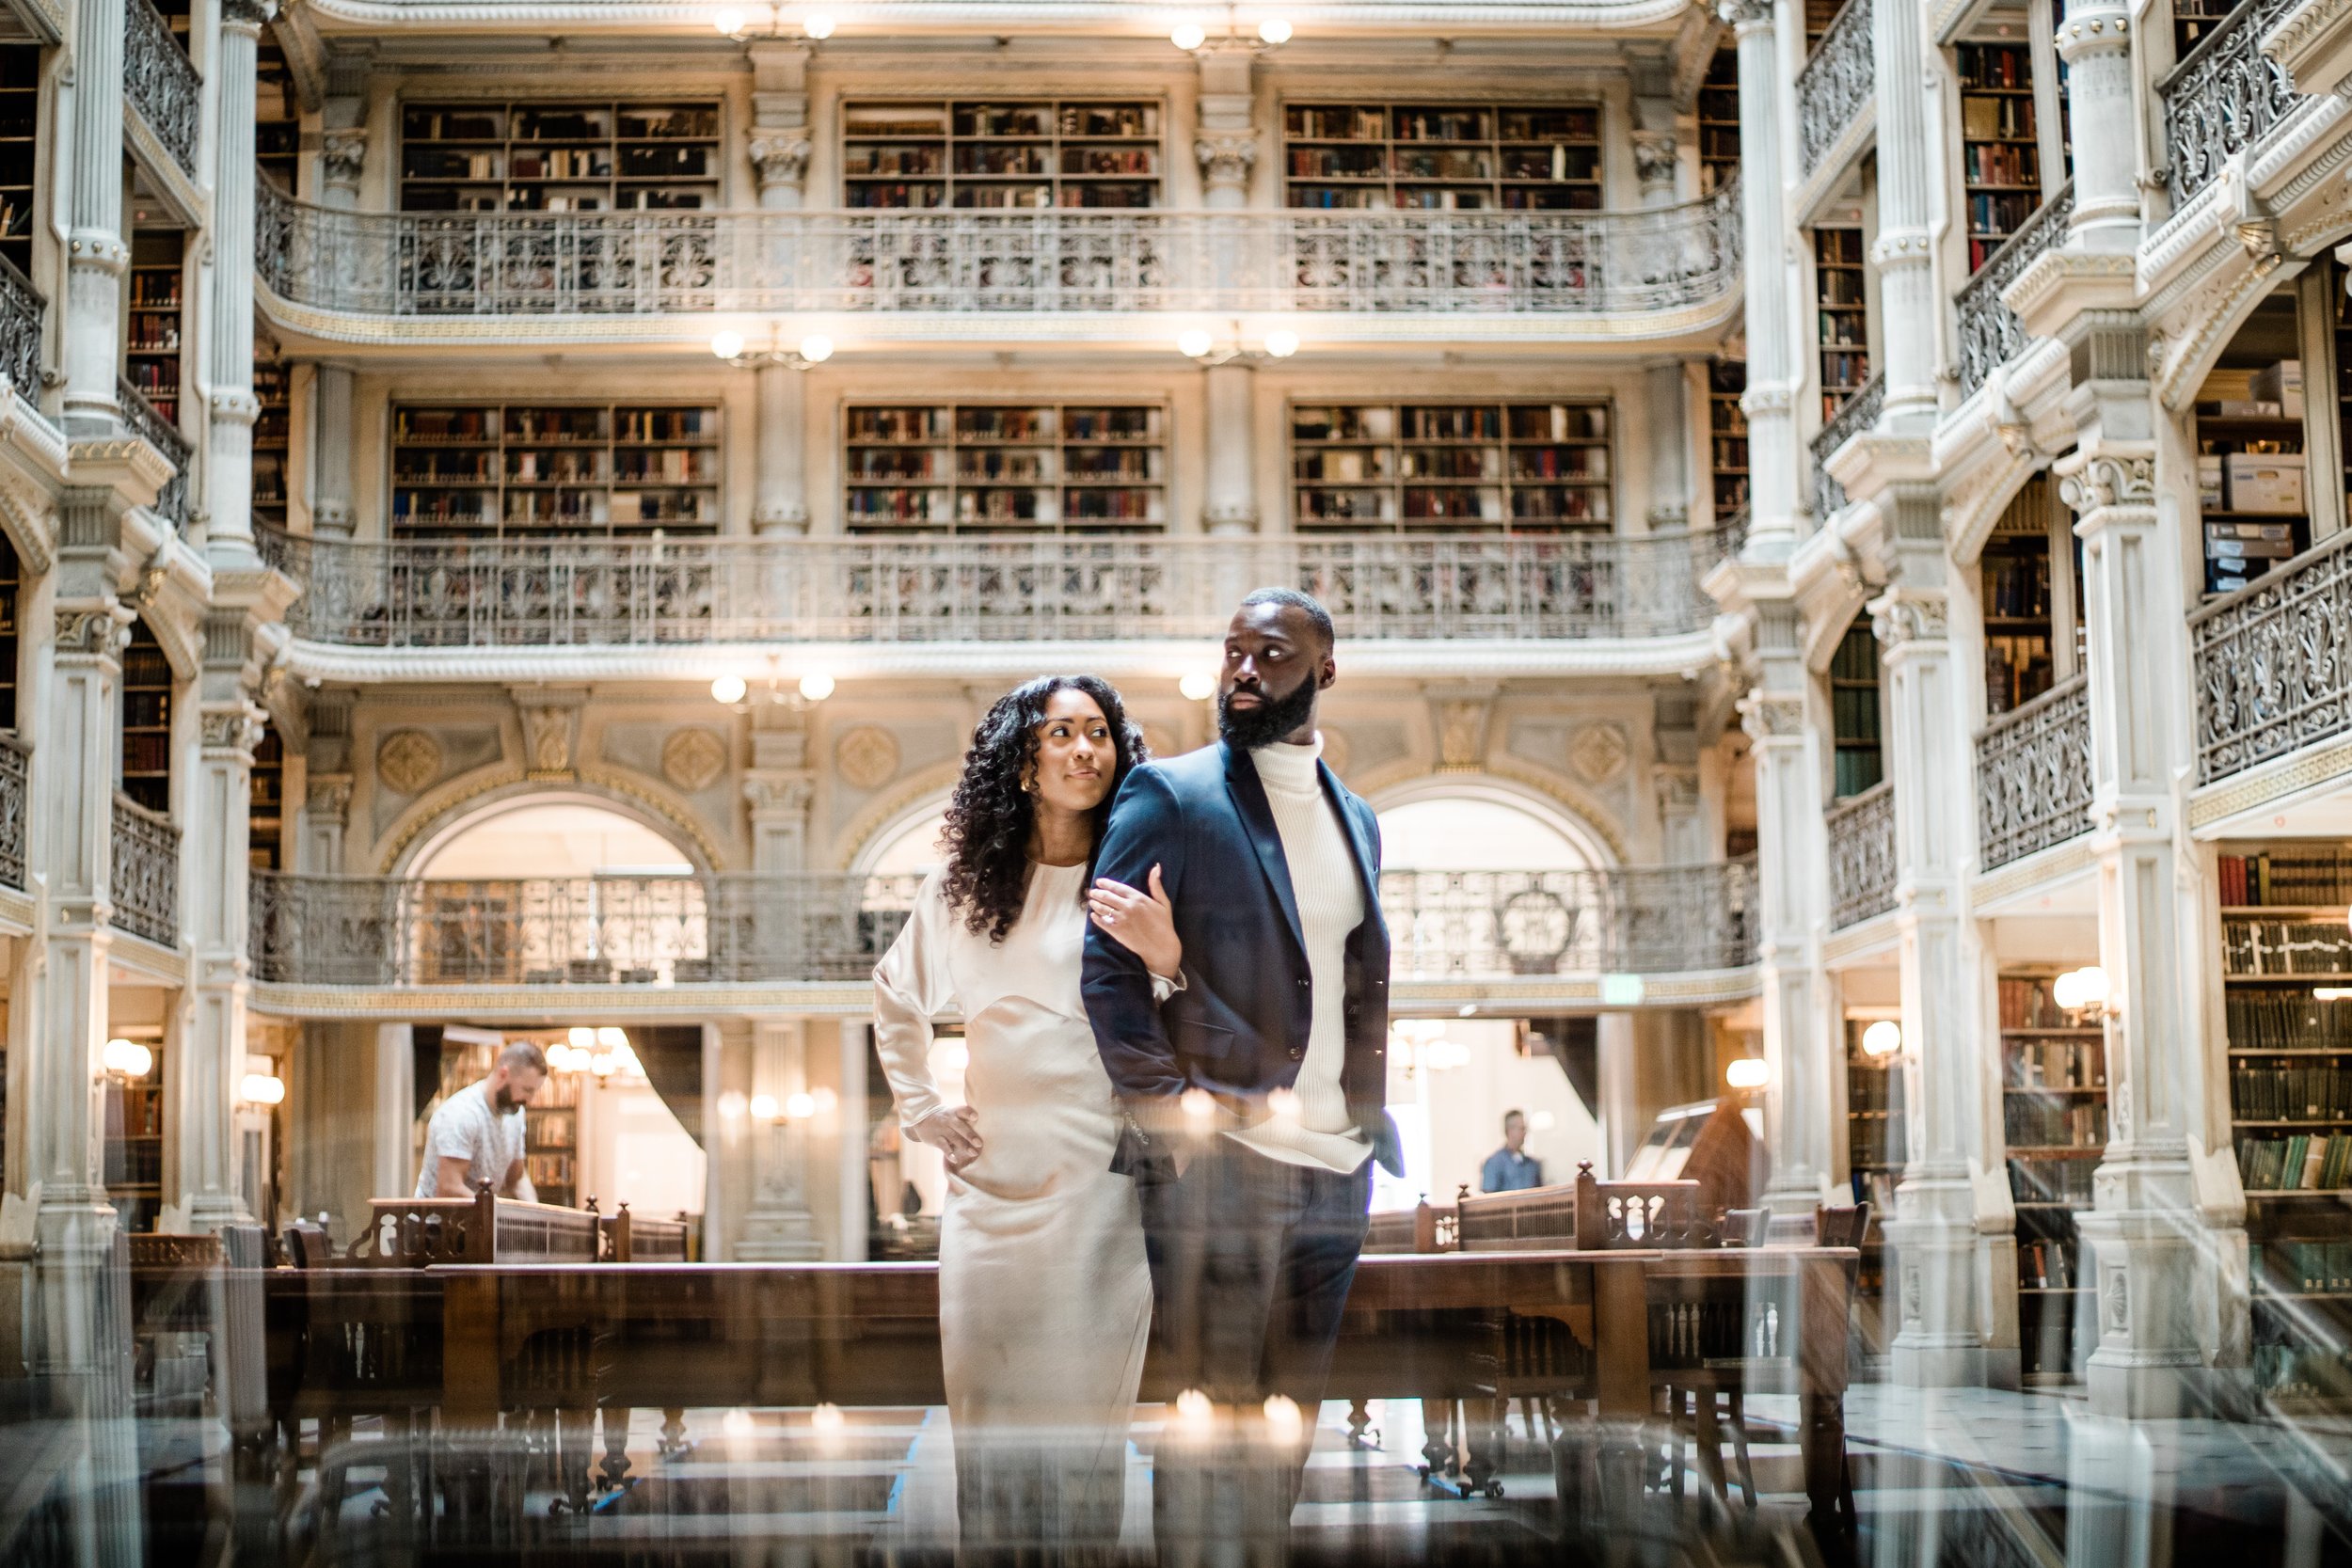 Disney Beauty and The Beast Inspired Engagement Session at The Peabody Library Baltimore Maryland shot by Megapixels Media Photography-1.jpg